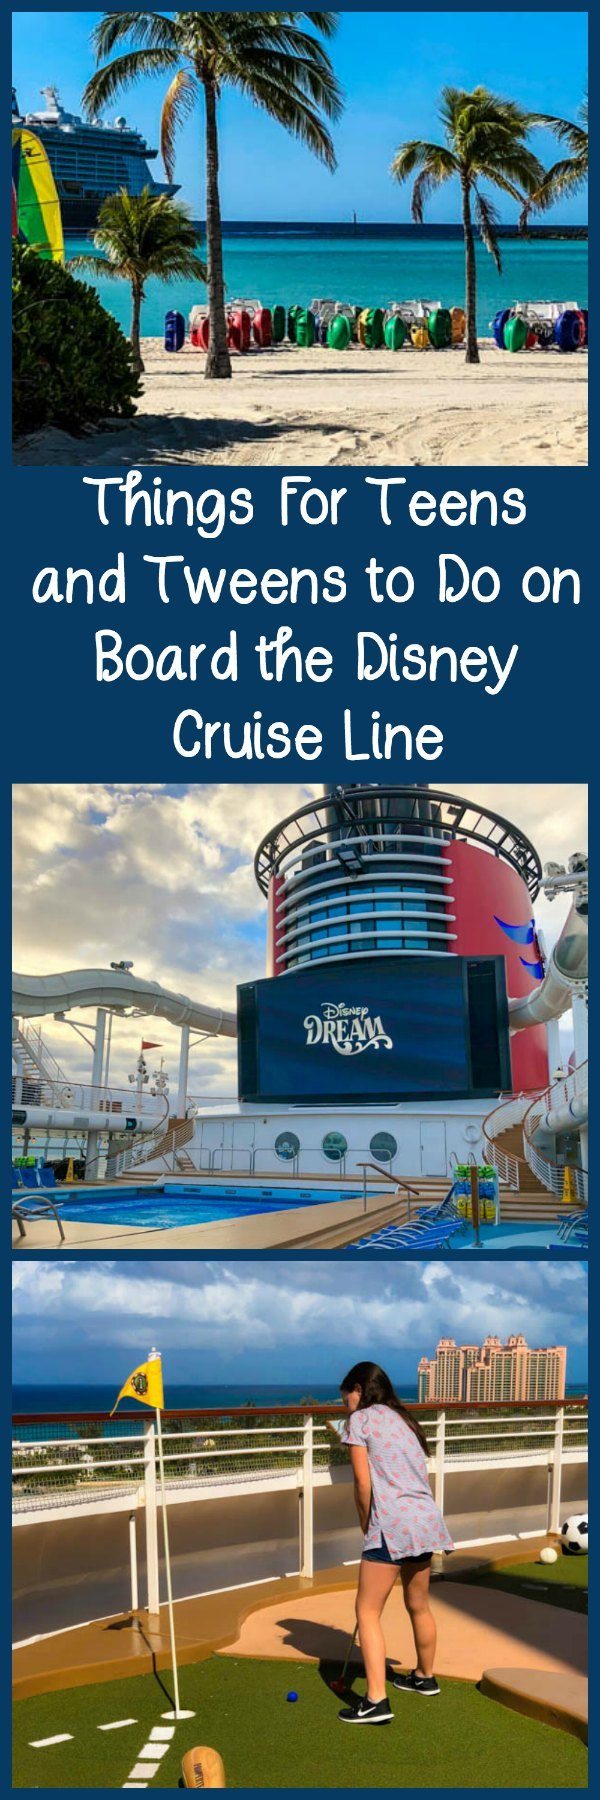 Things to Do on a Disney Cruise with Teens and Tweens, including teen clubs, Castaway Cay activities, the sports deck, movies, shows, and more. 